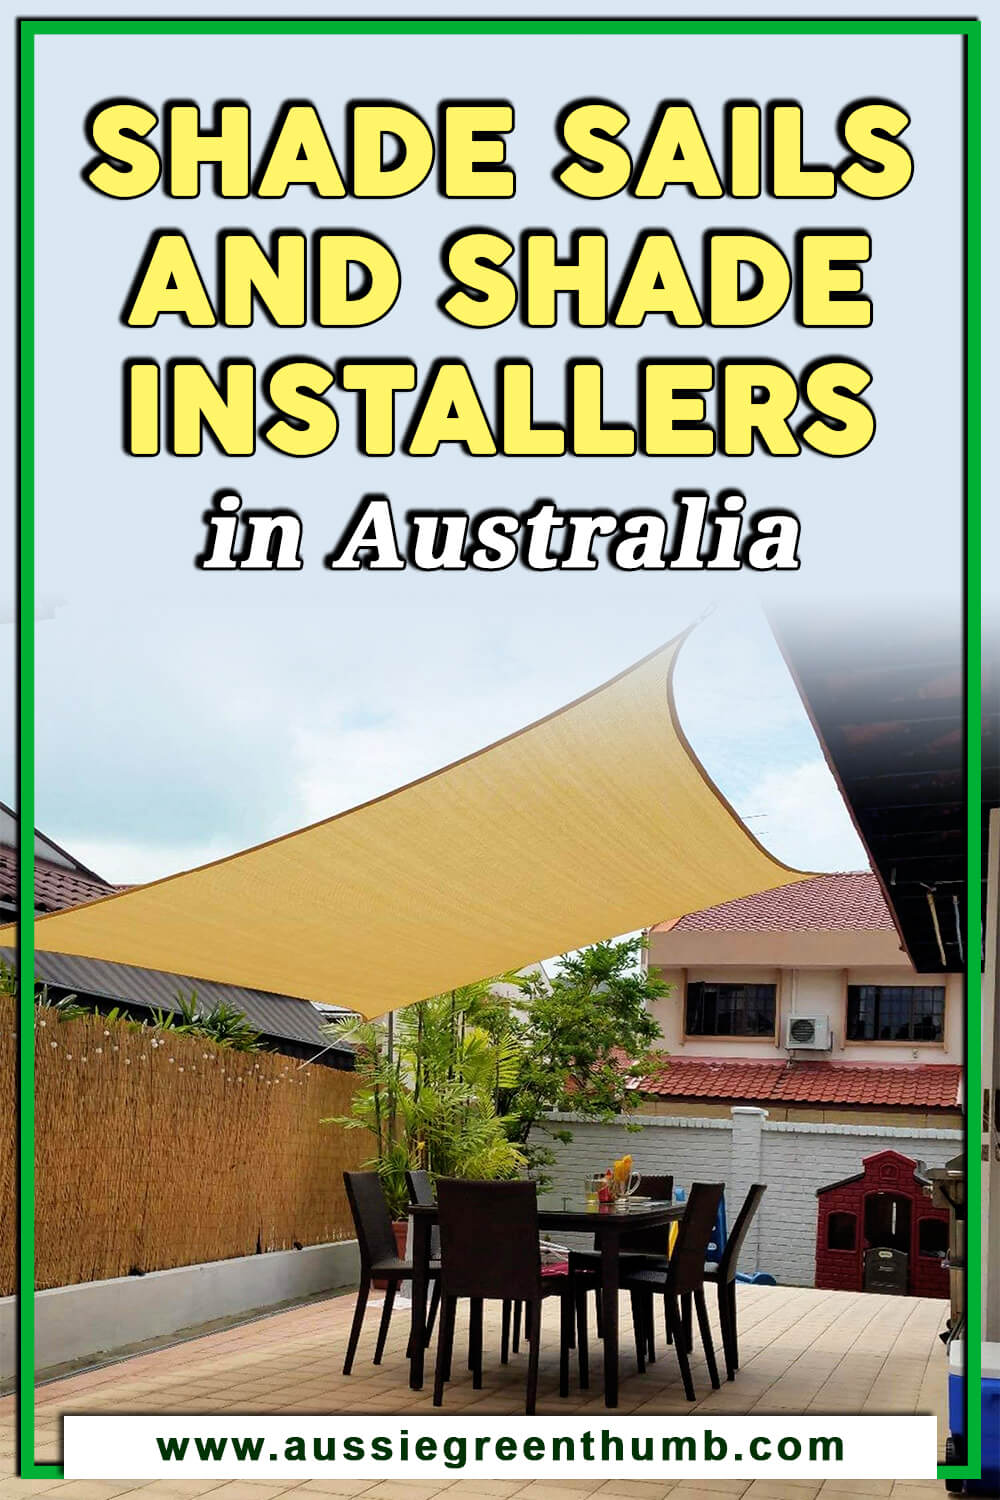 Best Shade Sails and Shade Installers in Australia